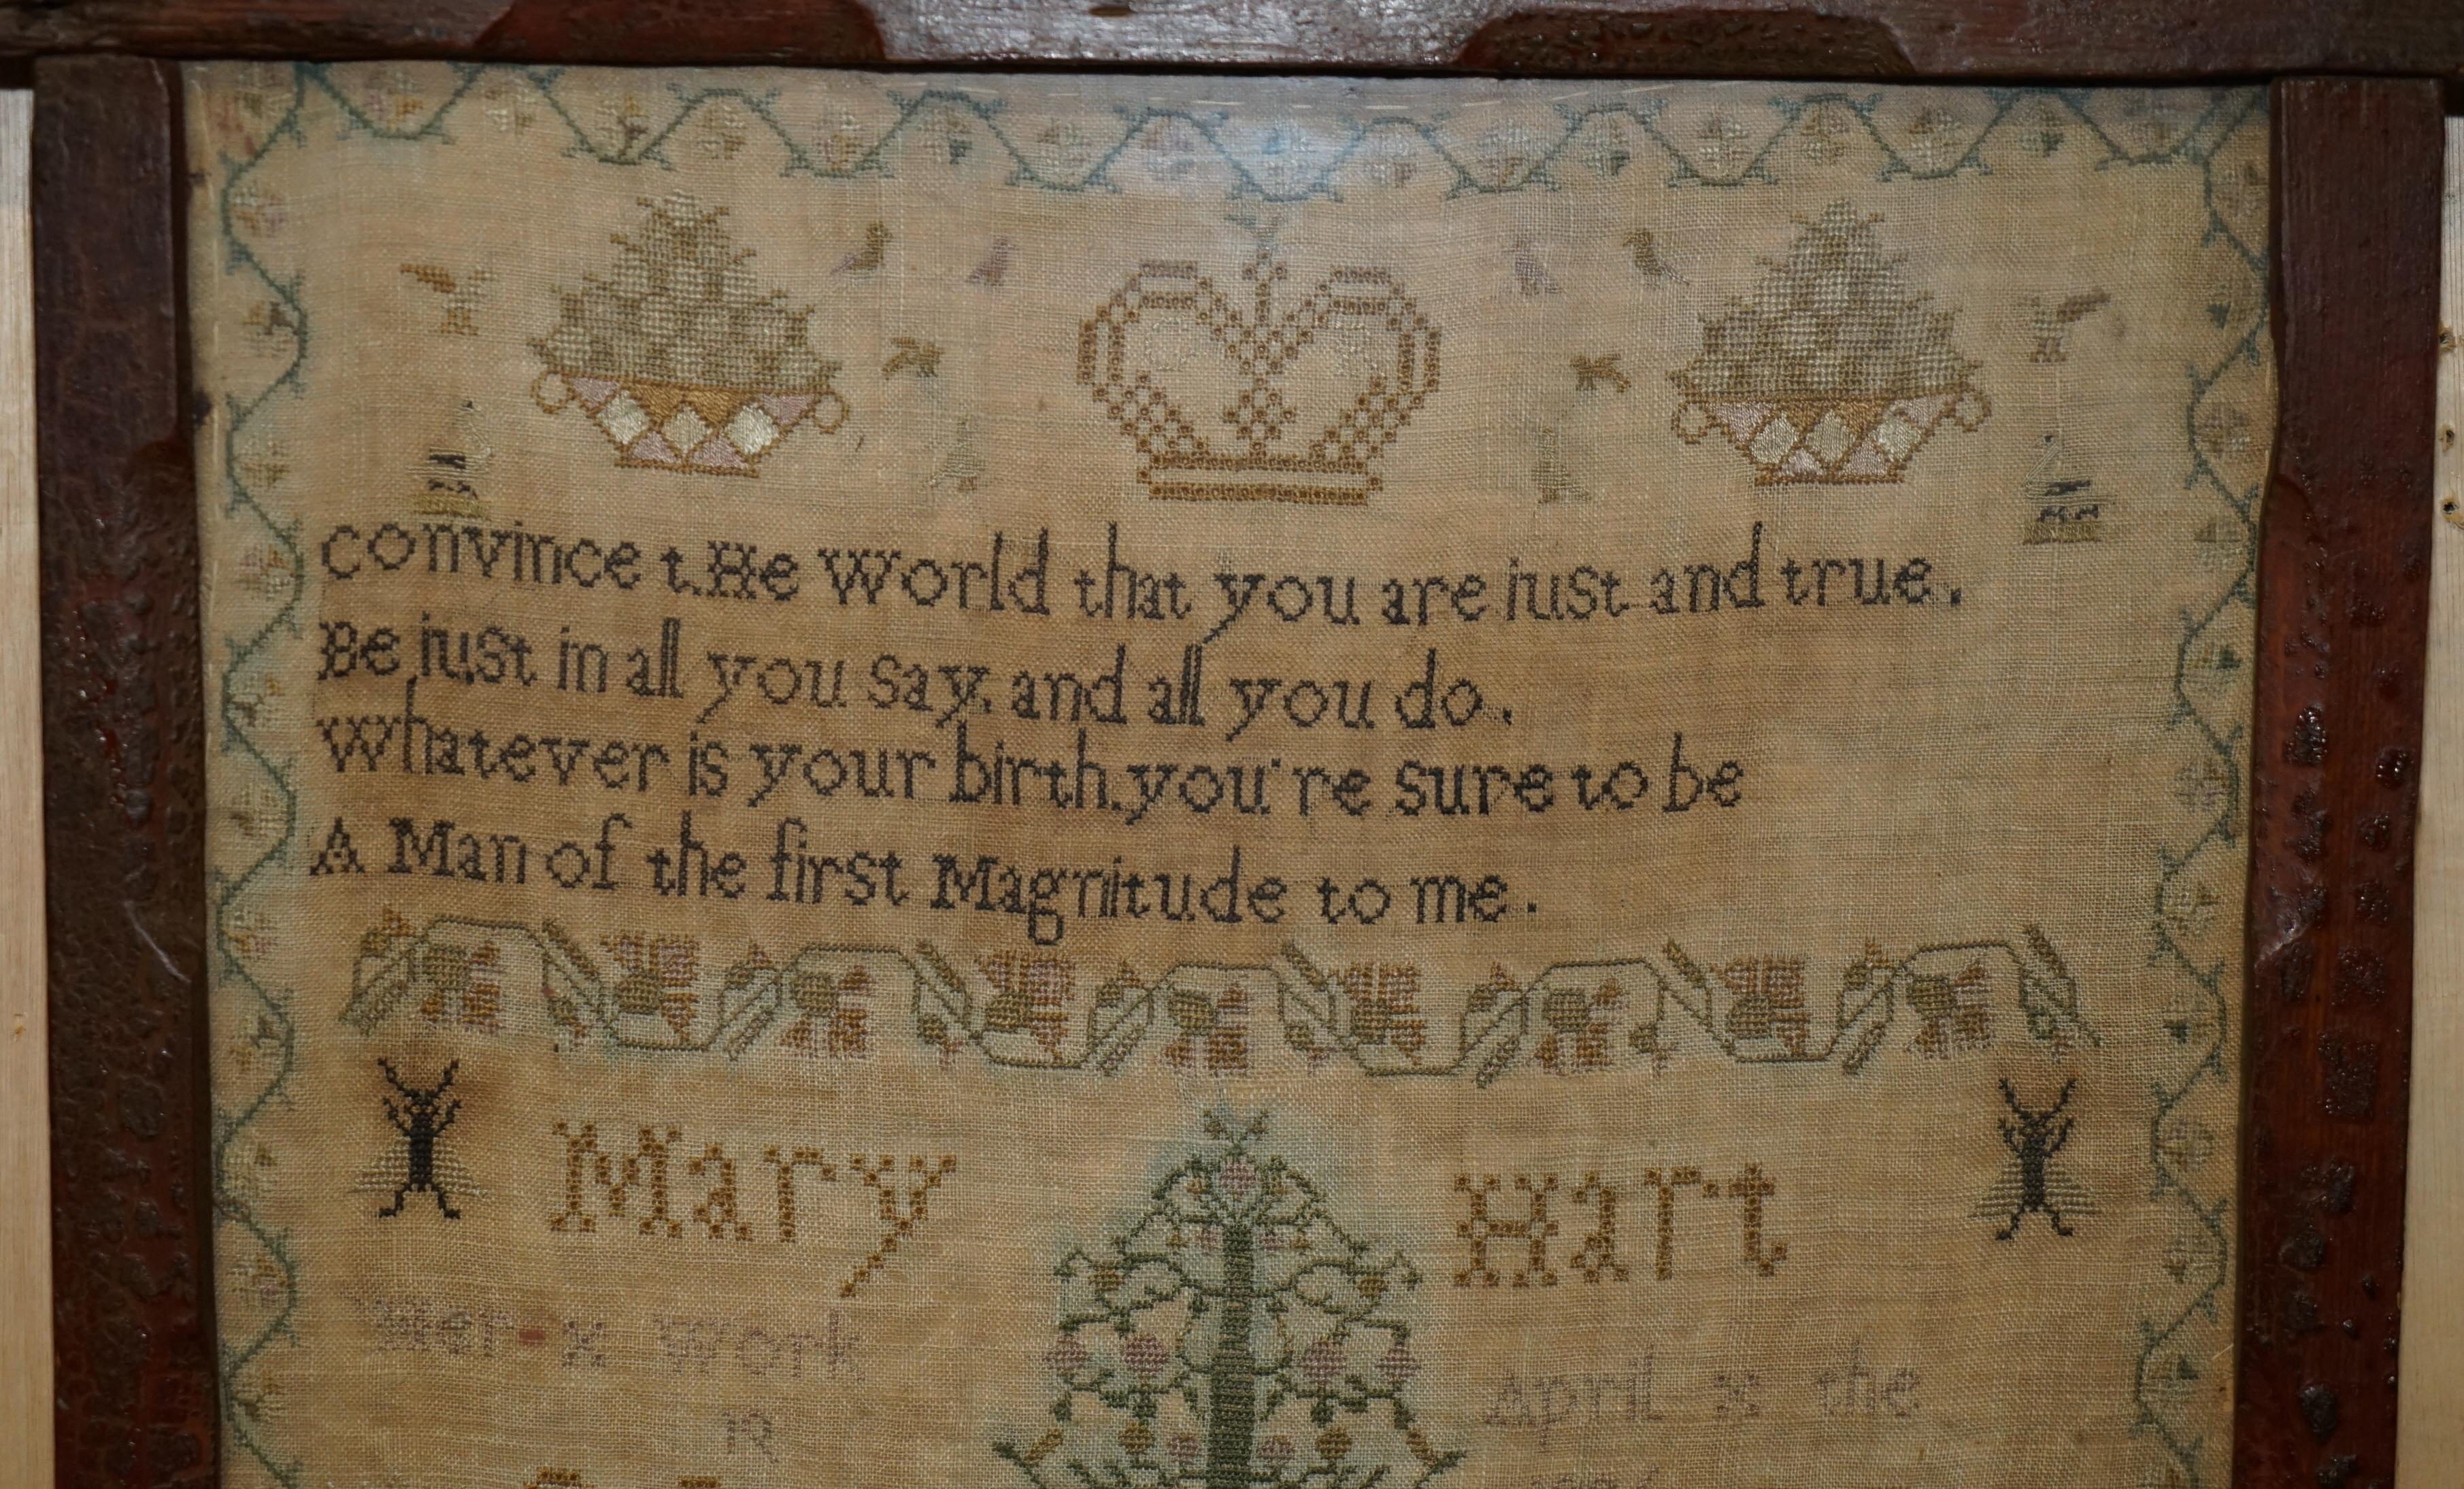 Royal House Antiques

Royal House Antiques is delighted to offer for sale this rather stunning, 1806 dated needlework sampler signed by Mary Hart depicting a lovely poem

I have four other versions of these samplers for sale, they are dated 1830,